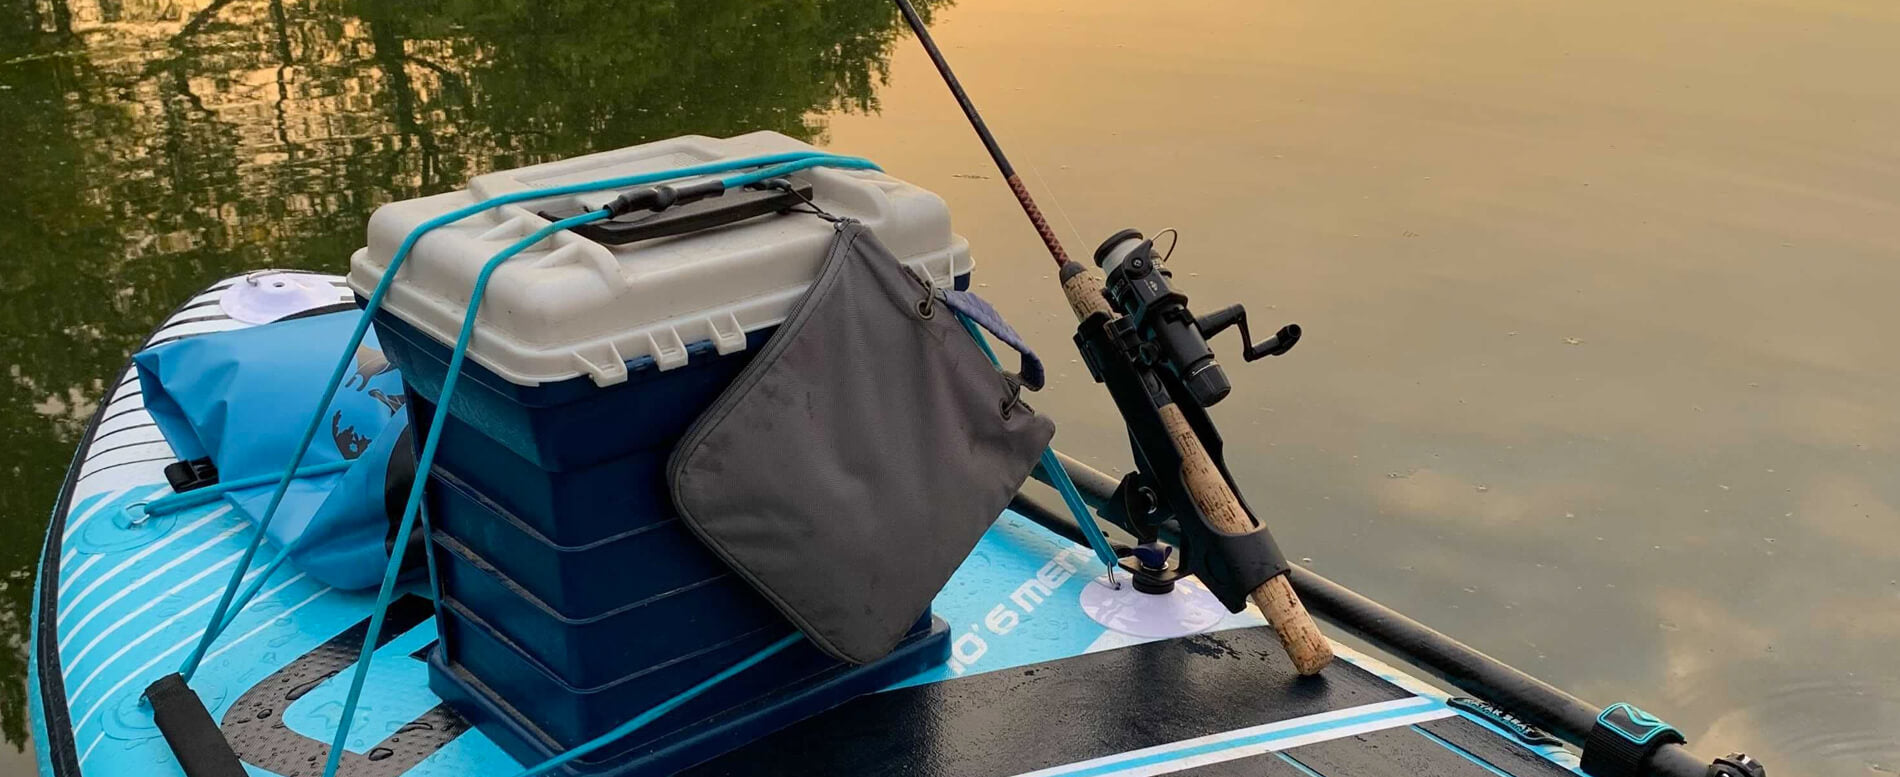 Does anyone know of any sort of rod holder I could put in my cart to hold  them vertically and use the space better? : r/Fishing